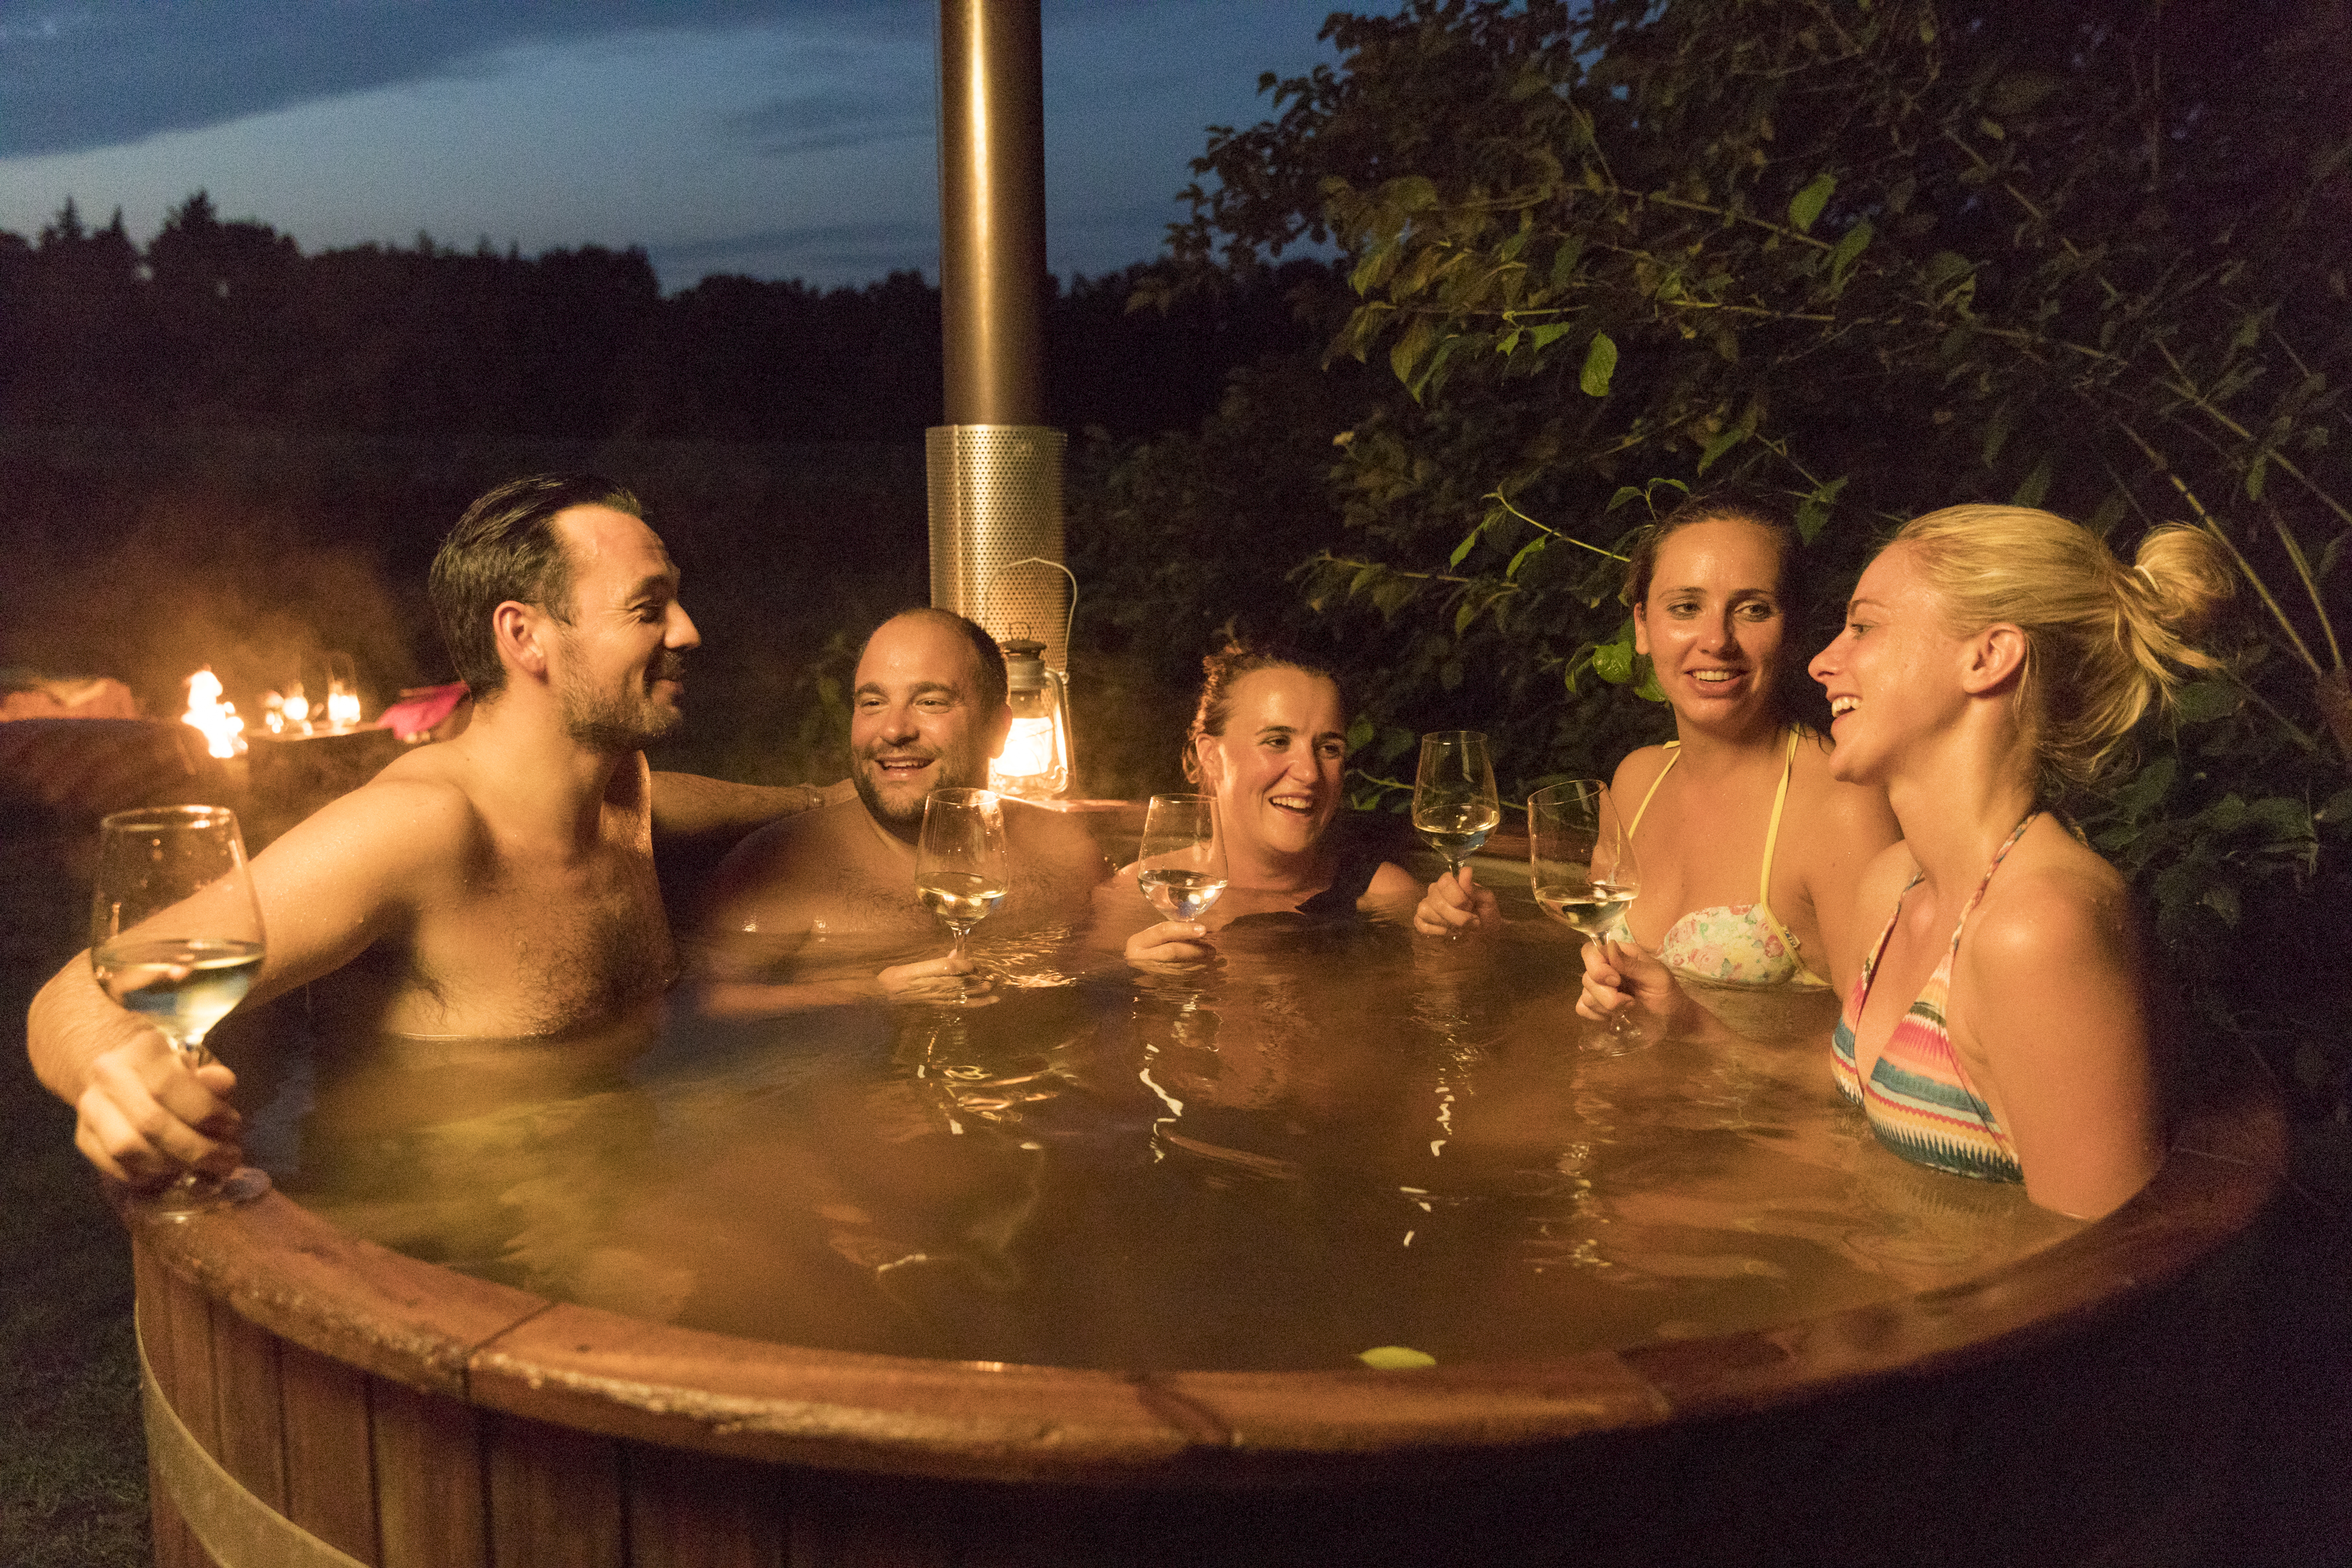 Adults in hot tub during evening